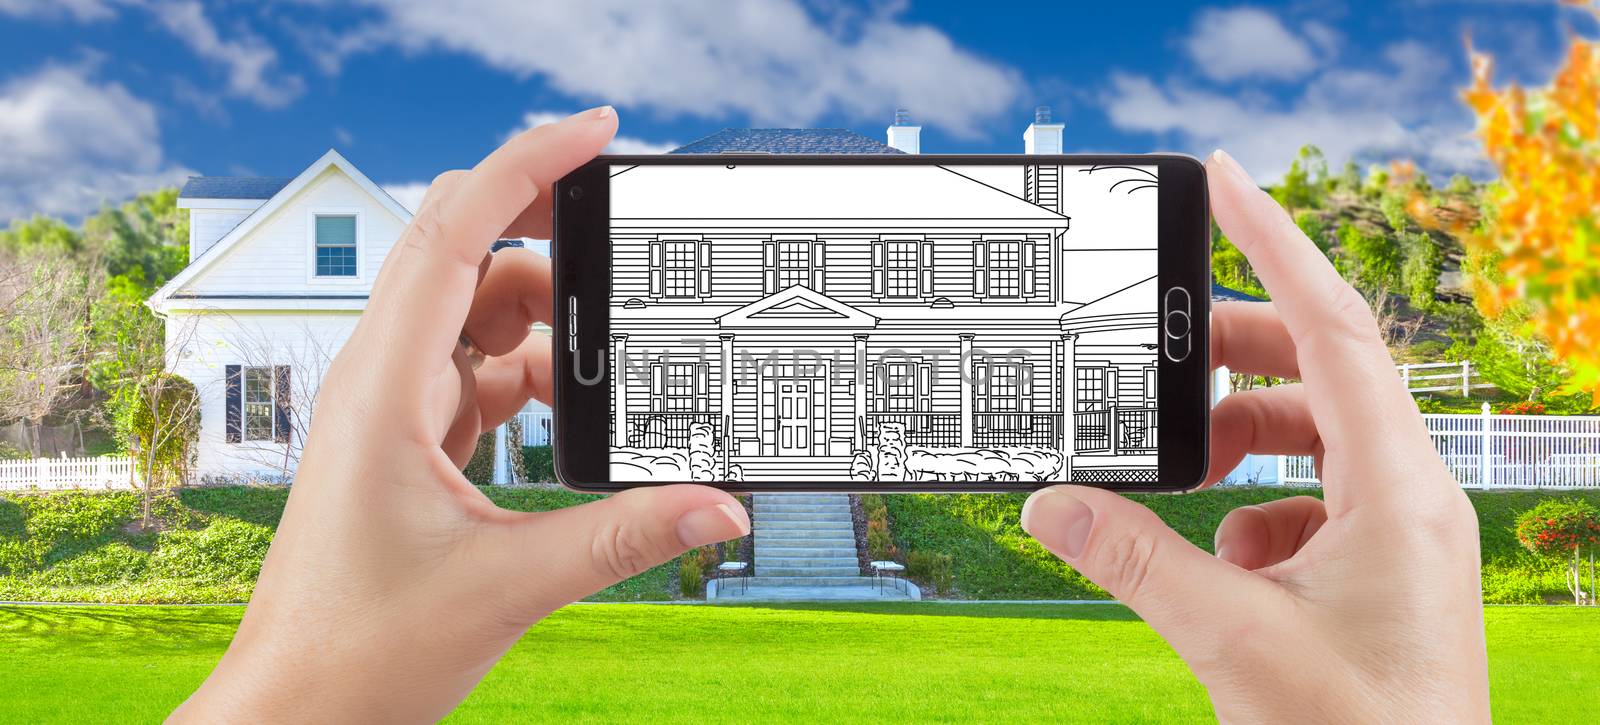 Hands Holding Smart Phone Displaying Drawing of Custom Home Photo Behind.